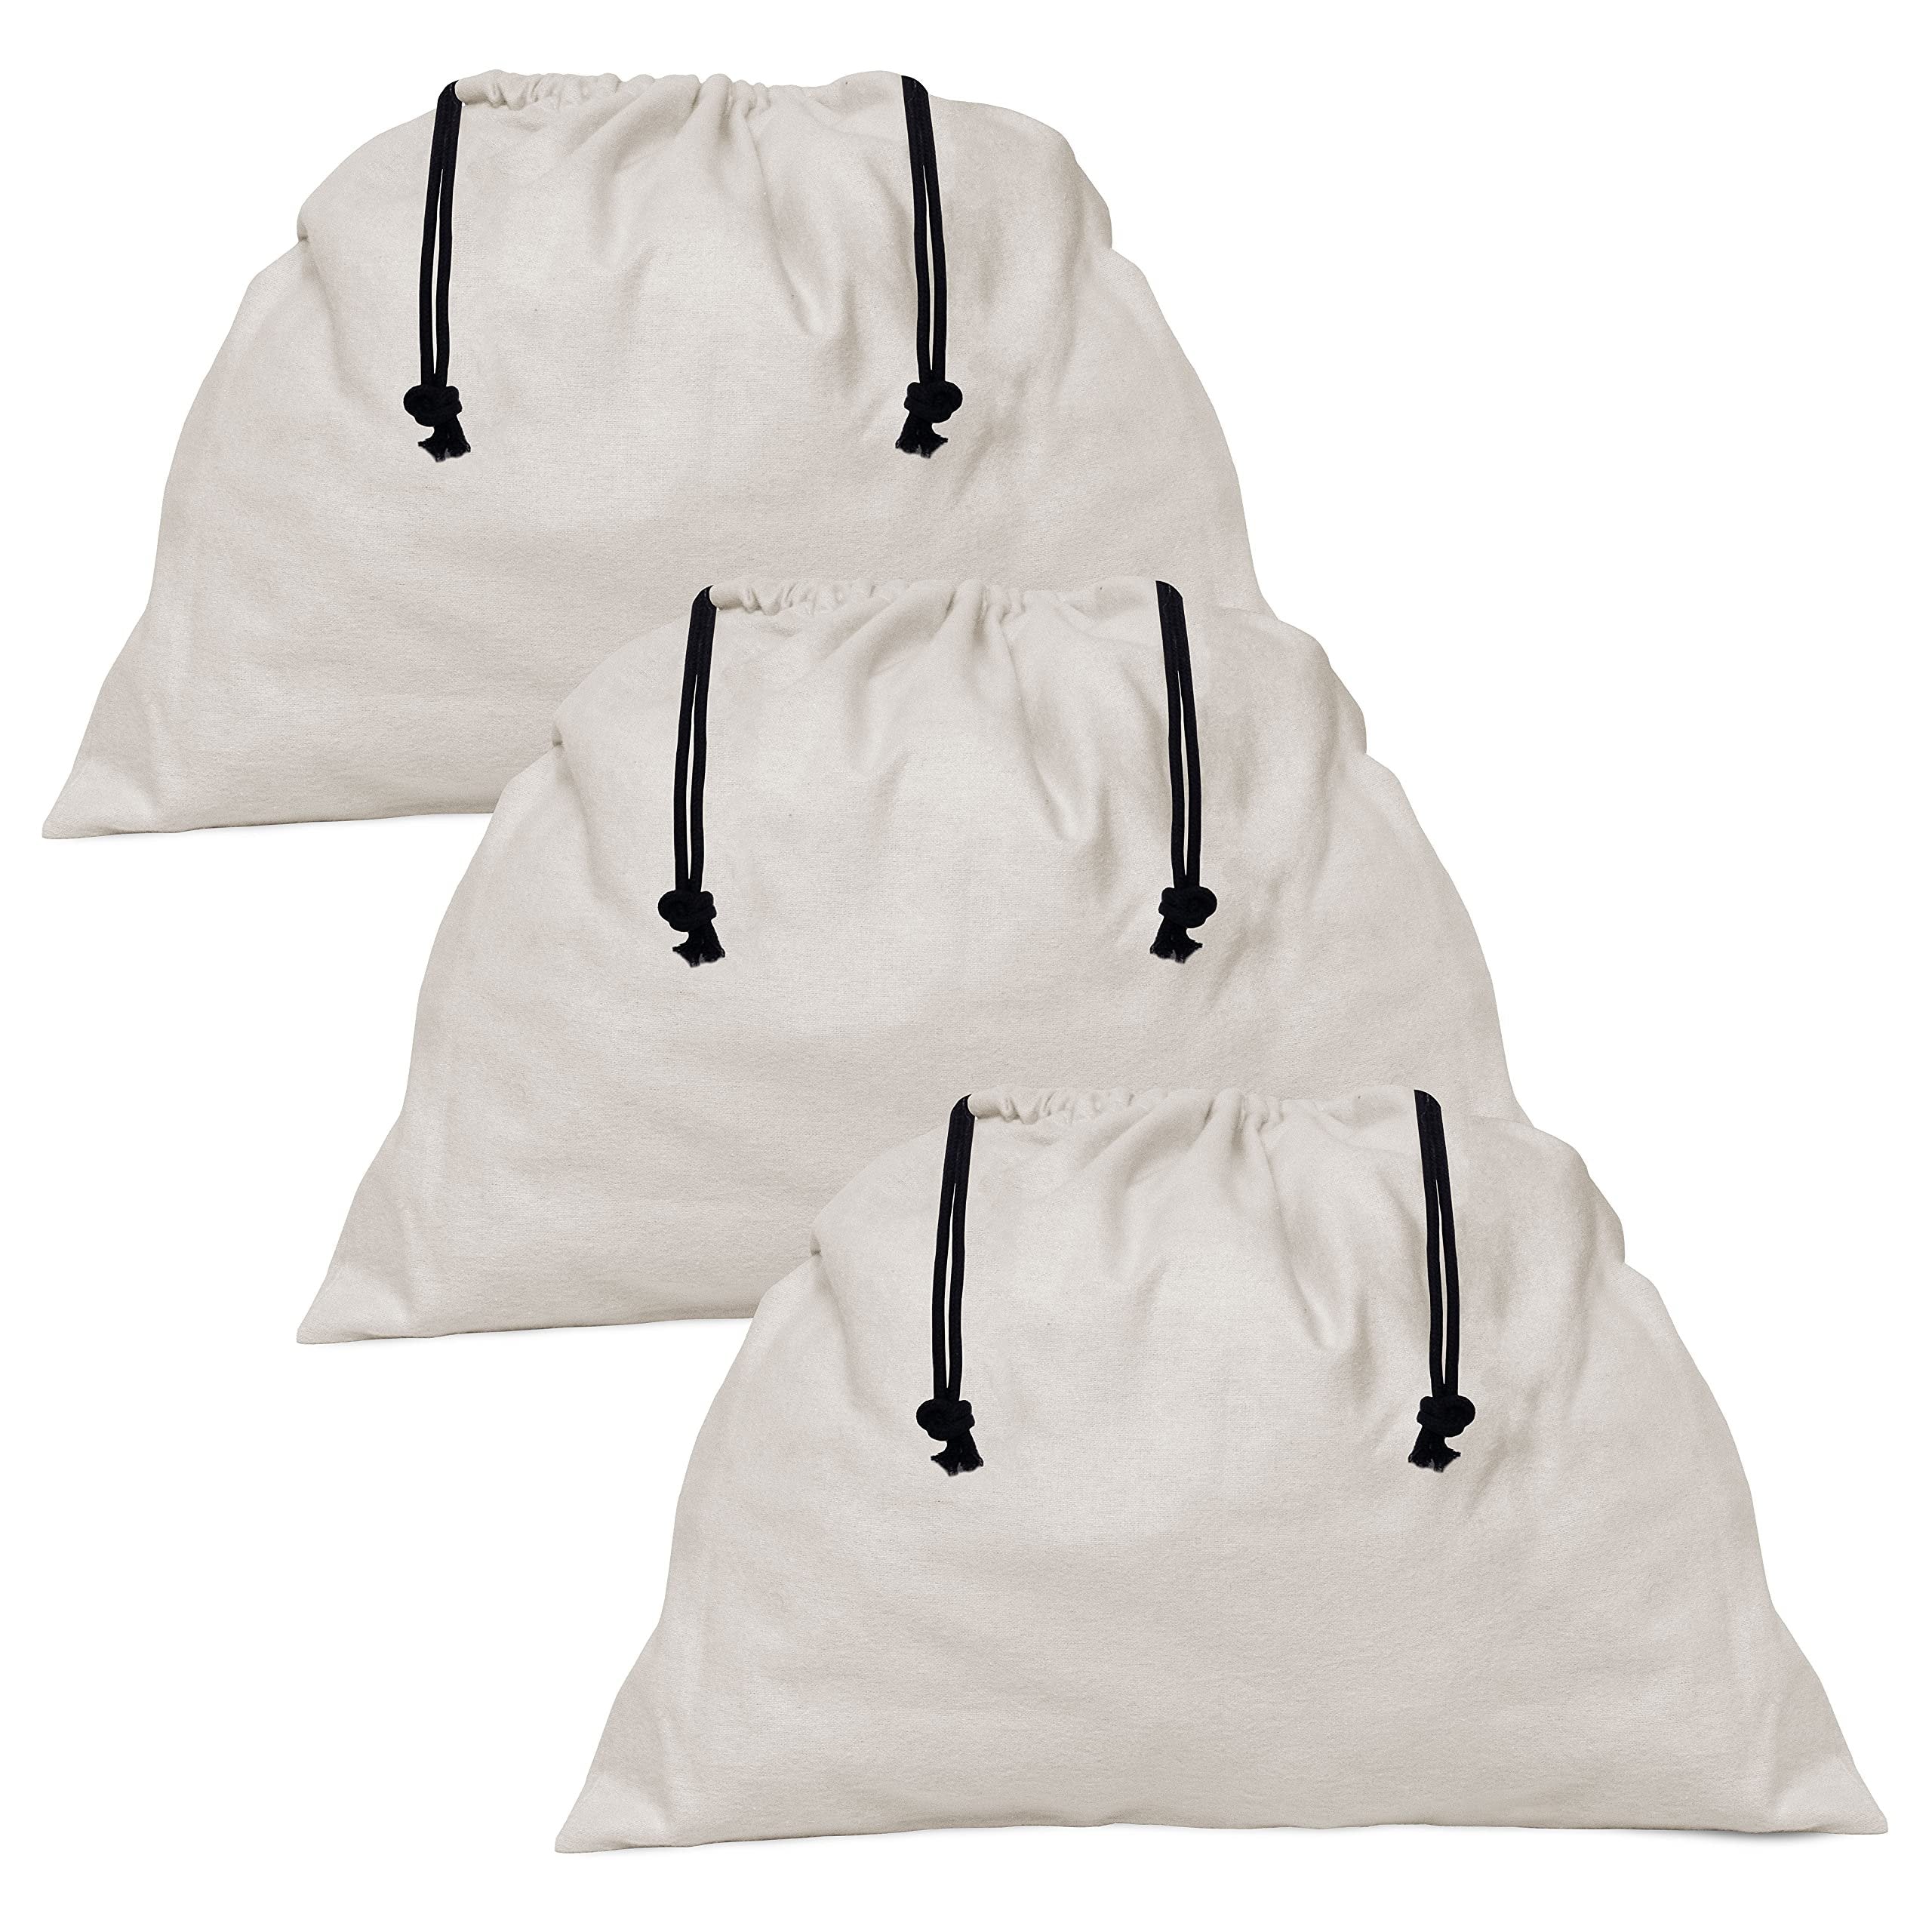 Extra Large PEVA Zippered Storage Bags with Handles, 3 Pcs. 21.6